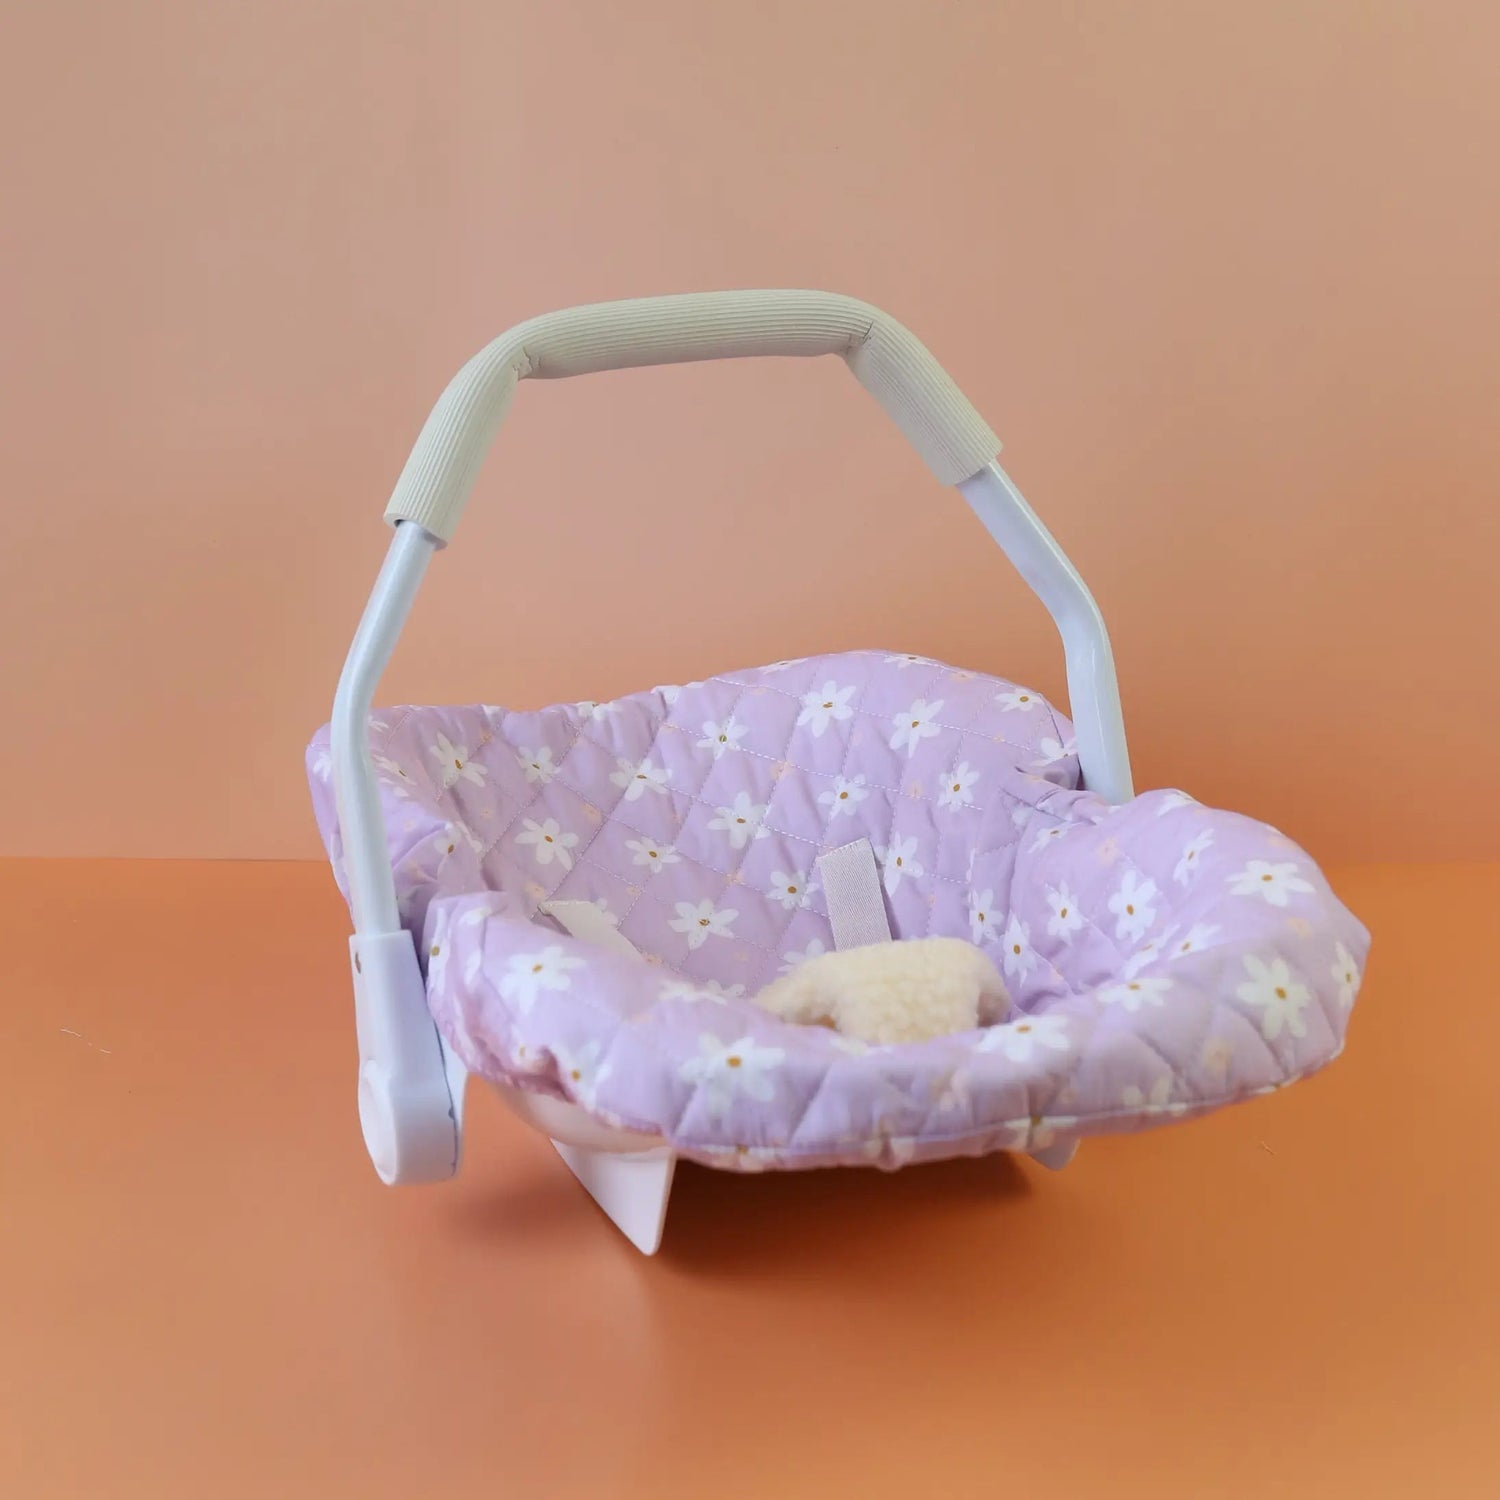 TINY HARLOW | DOLL'S CAR SEAT / CAPSULE - LILAC DAISY *PRE-ORDER* by TINY HARLOW - The Playful Collective